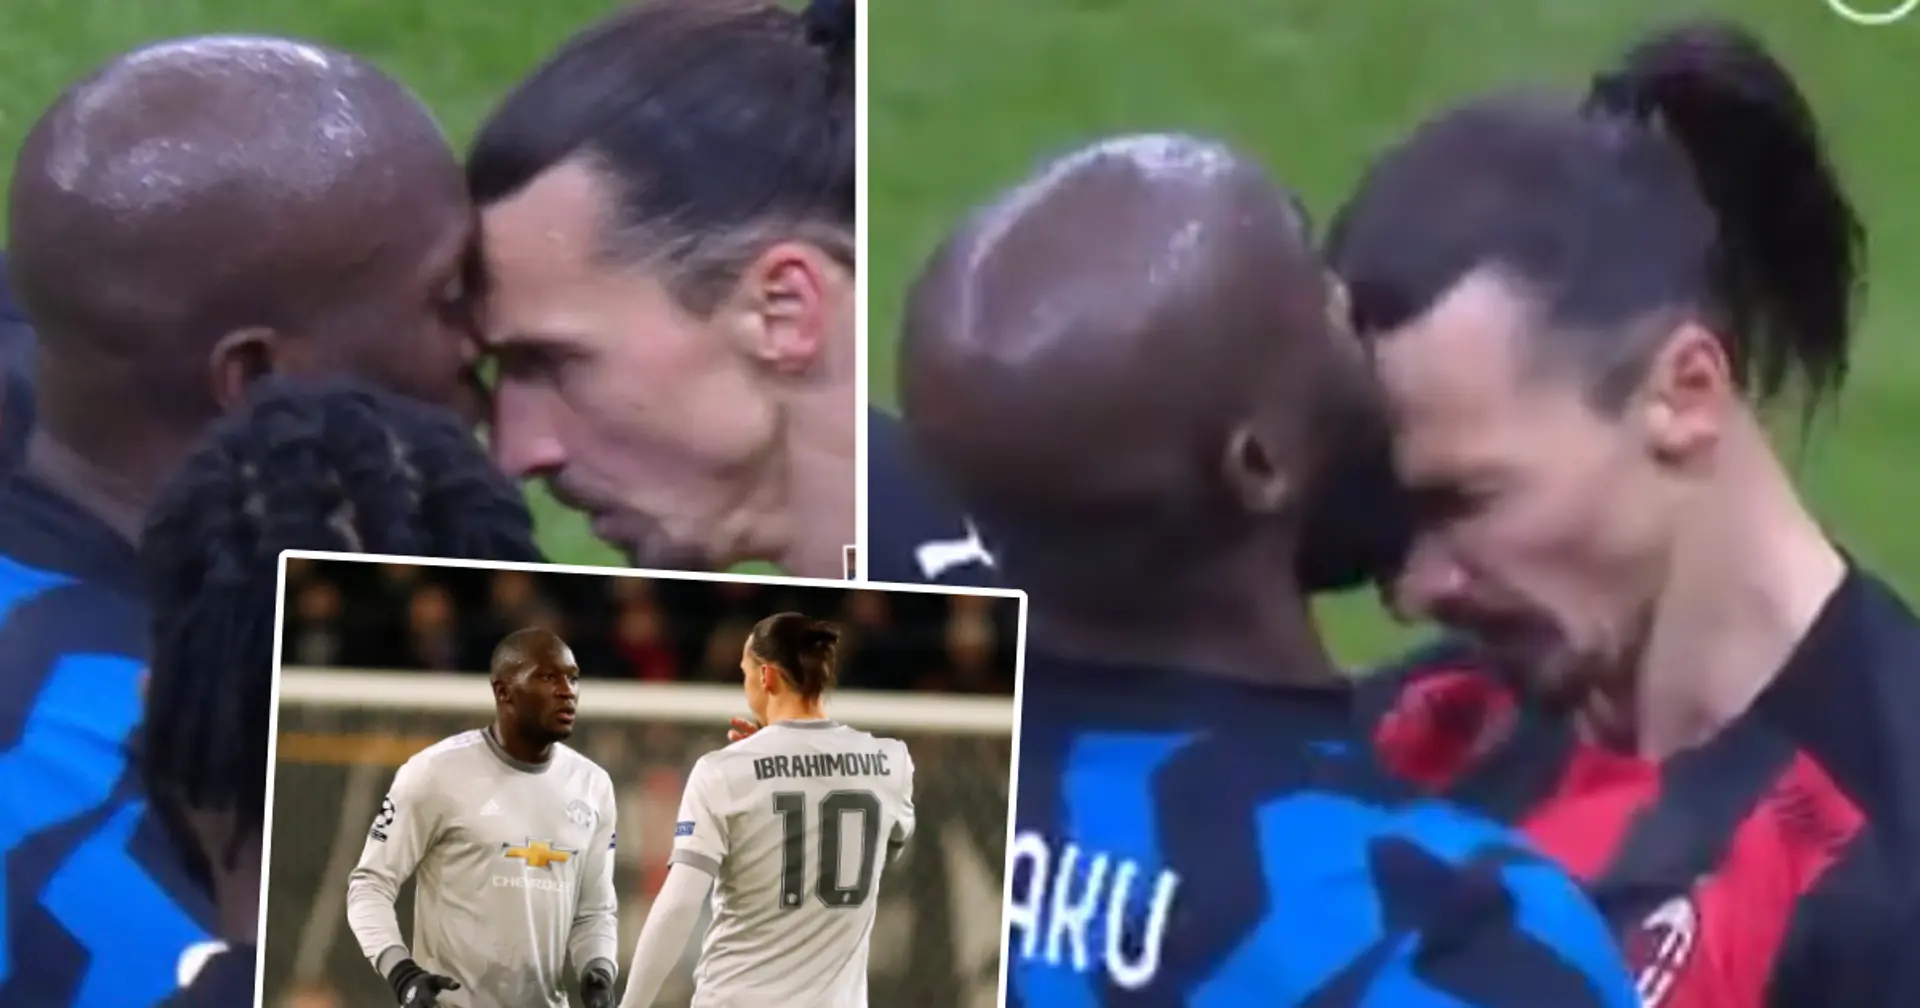 Lukaku and Zlatan clashing in Italy: 'You want to speak about my mother? I f*** you and your wife'